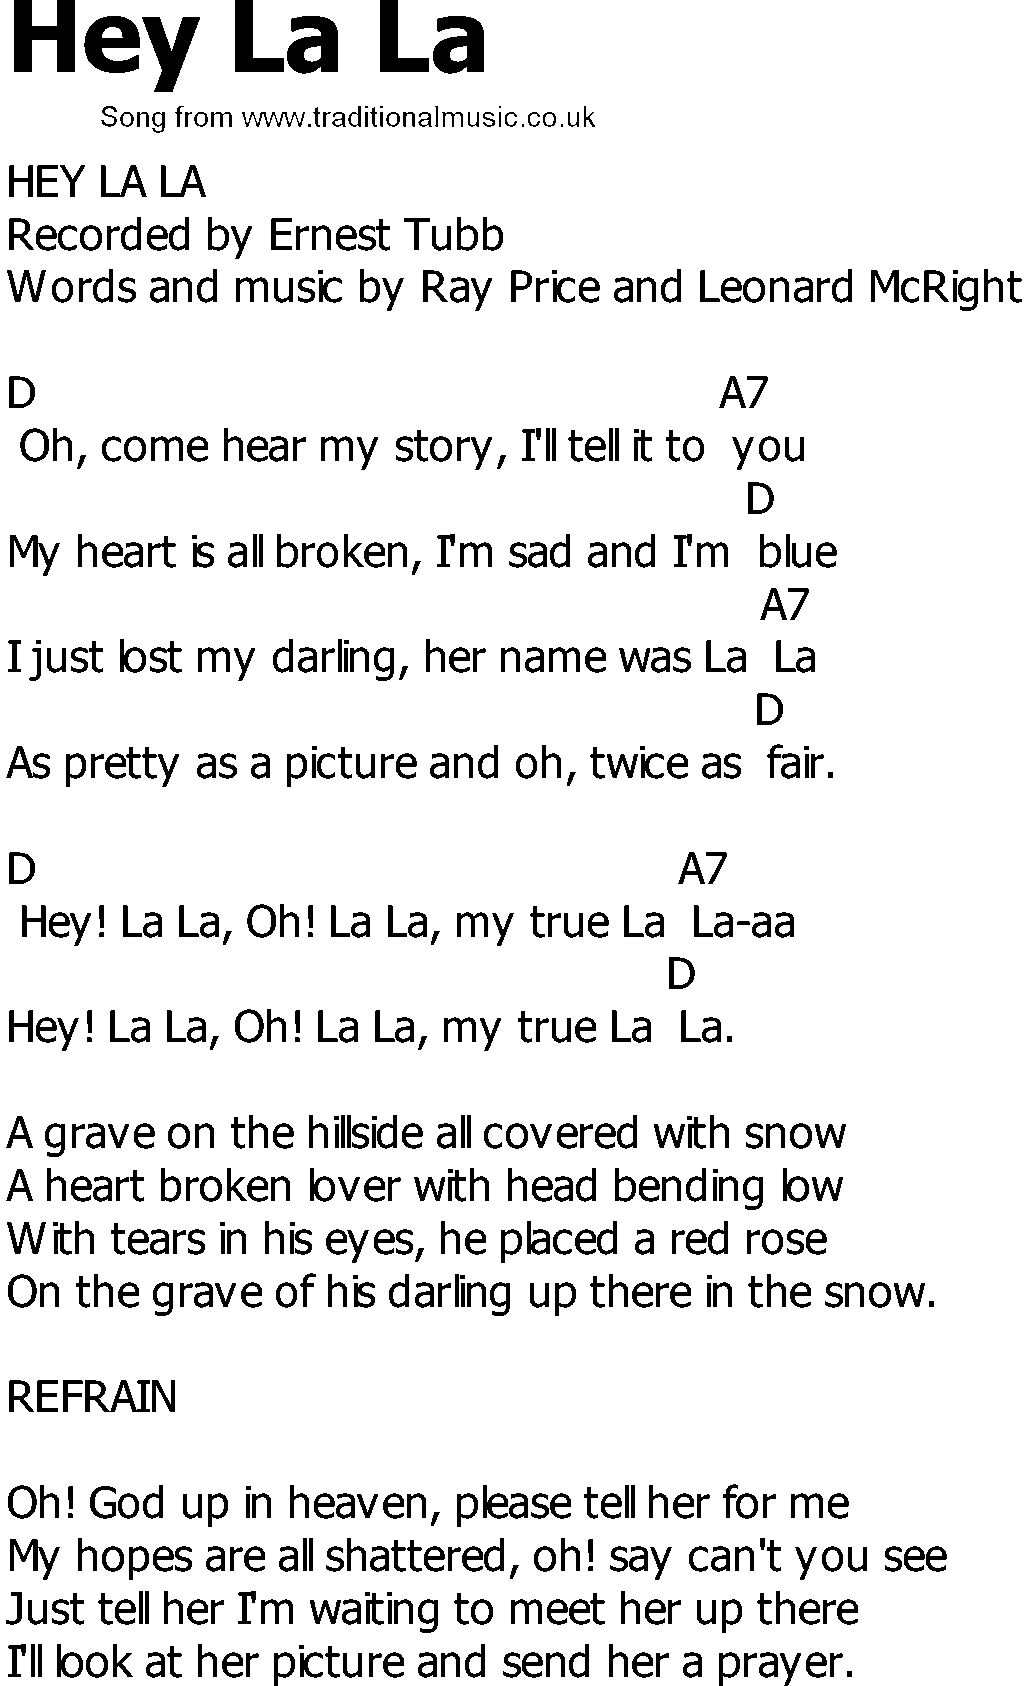 Old Country song lyrics with chords - Hey La La